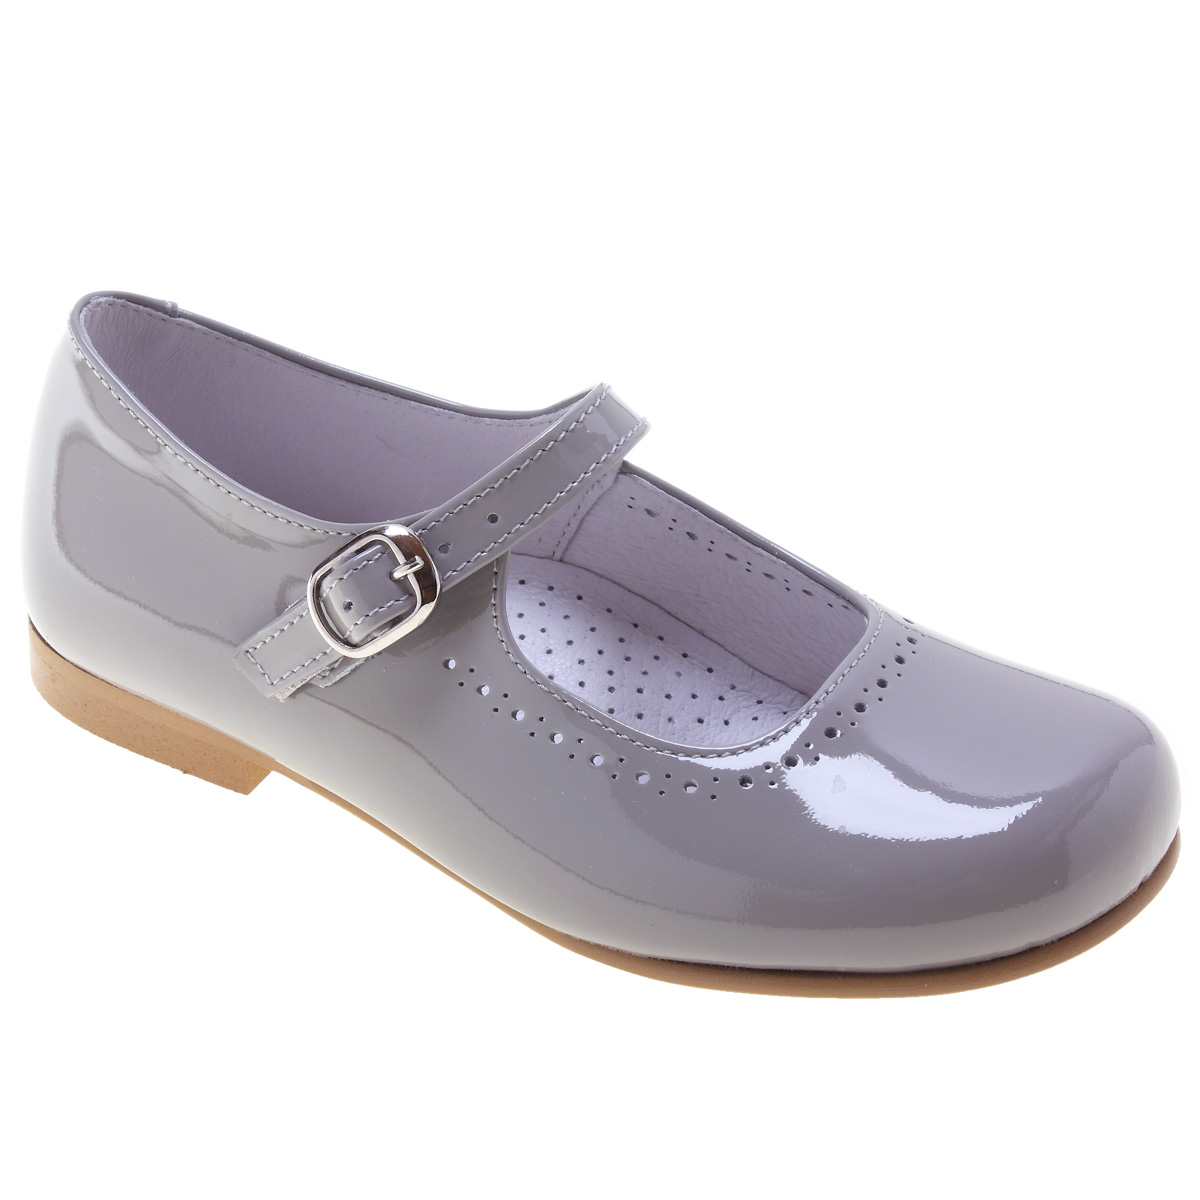 girls grey patent shoes